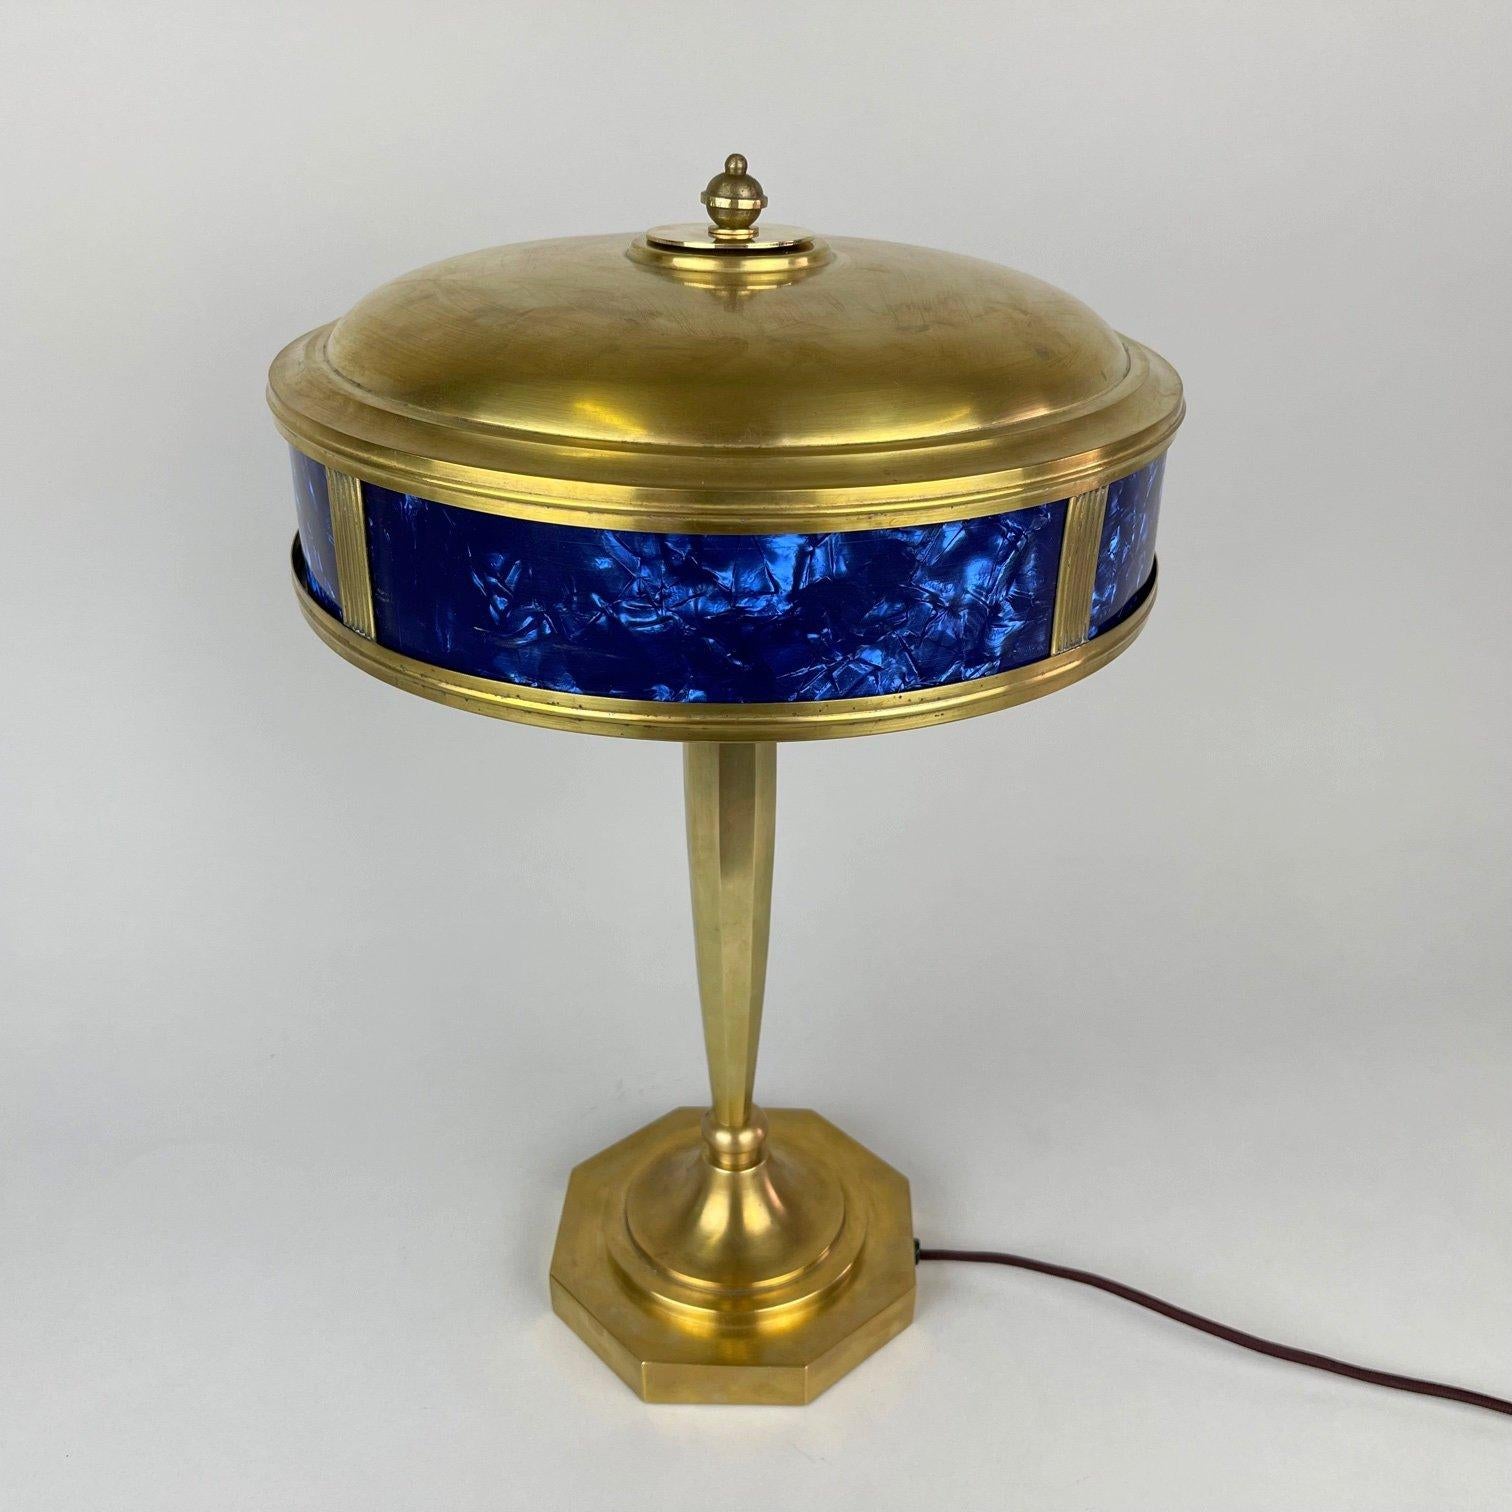 Beautiful heavy art deco brass table lamp. The lamp has a gorgeous original ceramic switch (see photo), fully functional. The cord has been replaced, as well as the coloured shade. 
Bulbs: 1 x E27 or E26.